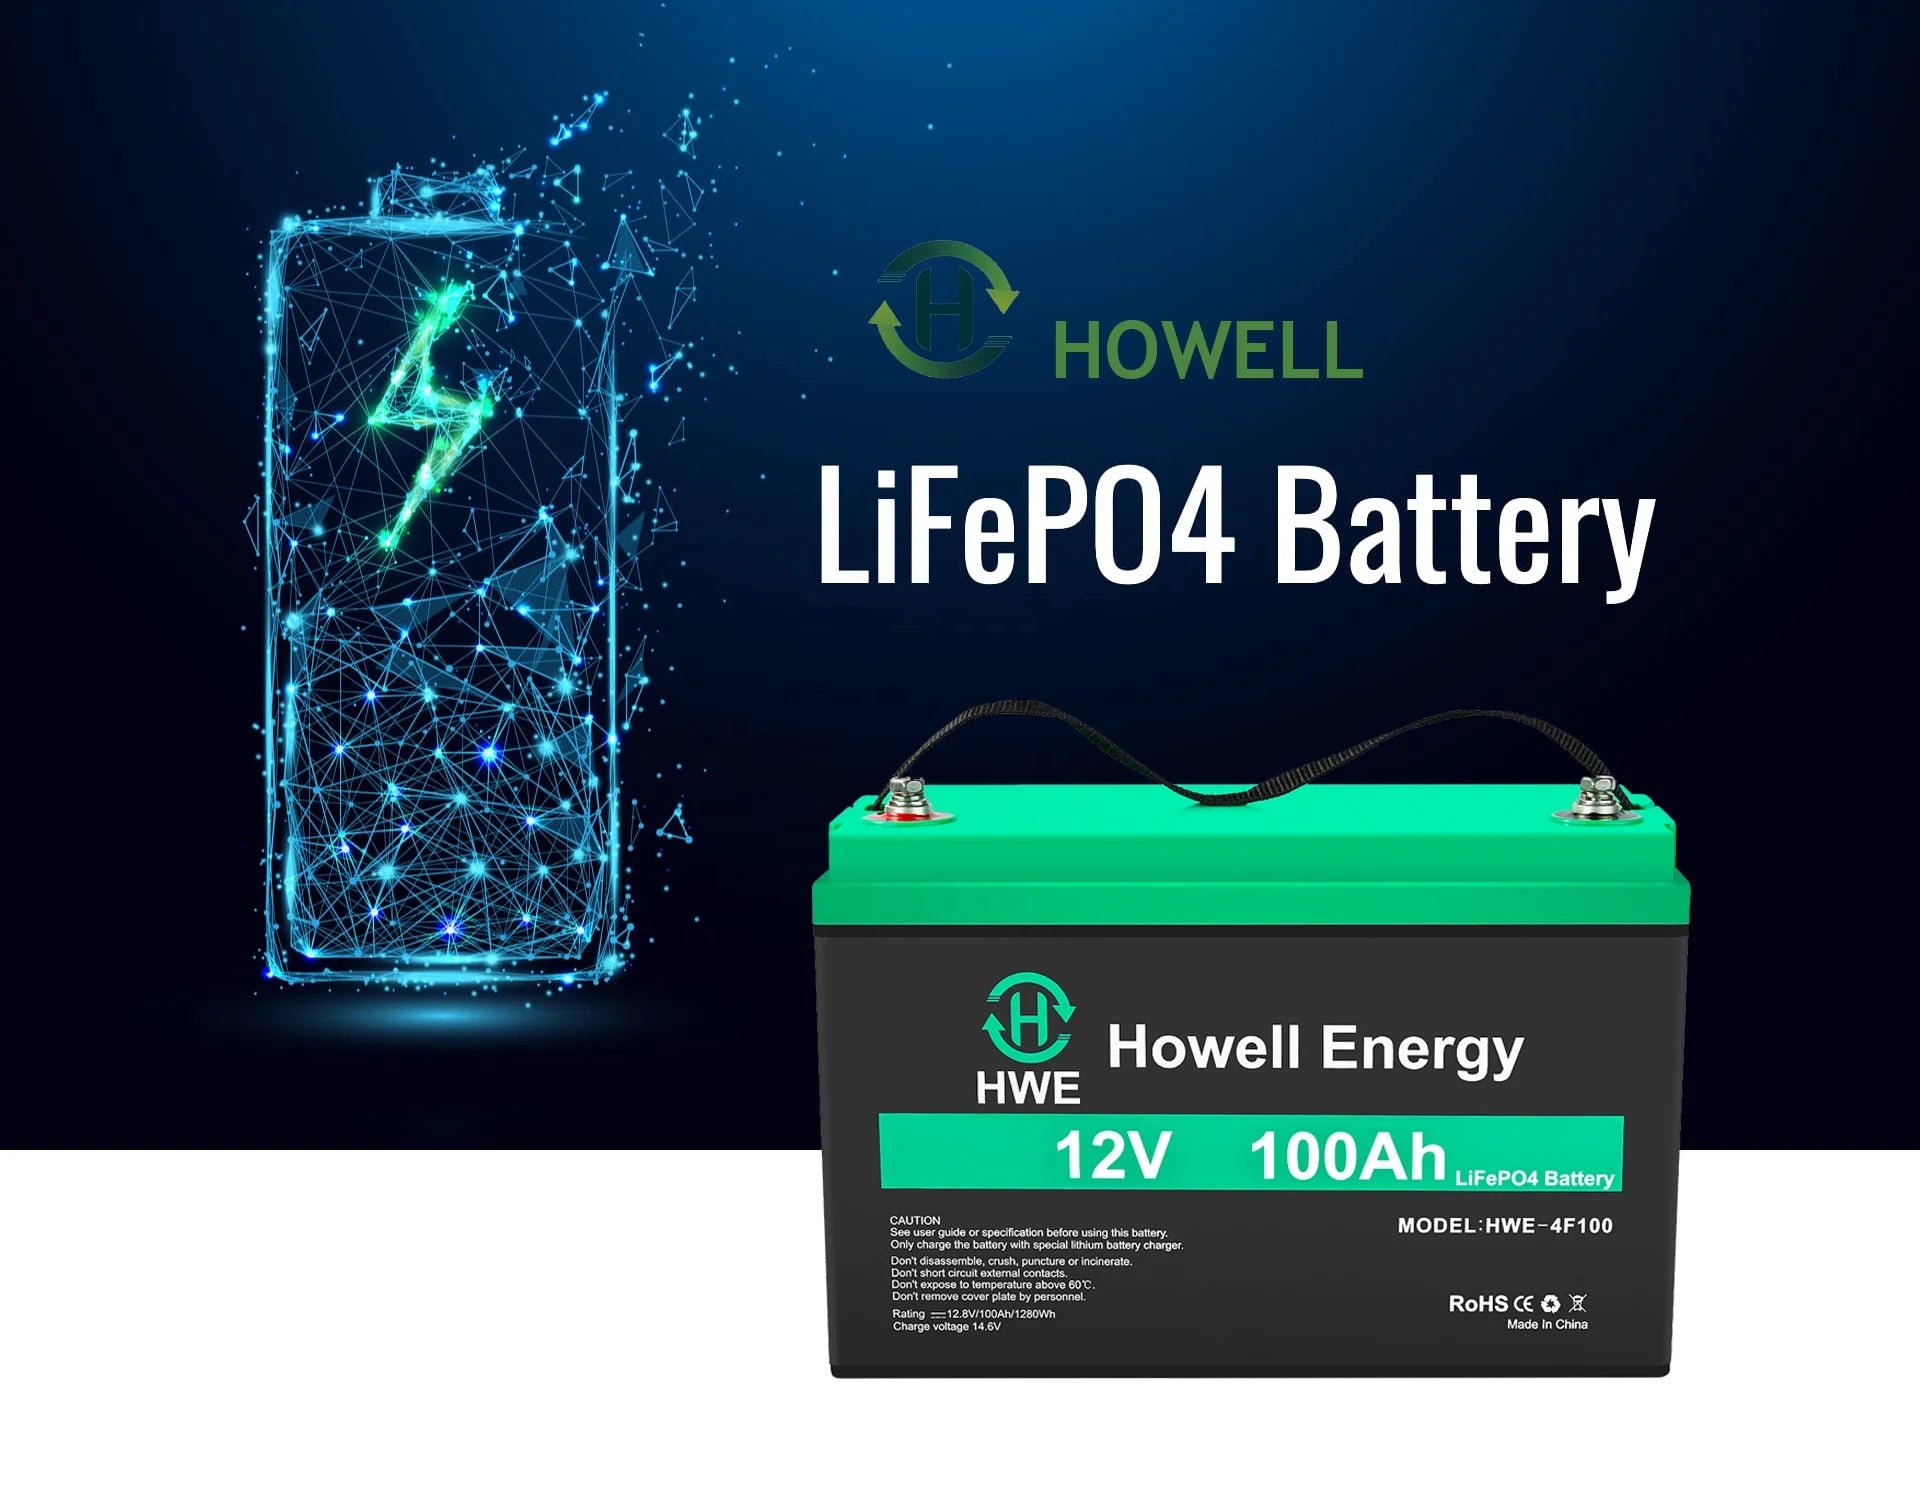 Howell 12v 100ah Battery, LiFePO4 battery for RVs, boats, and golf carts; follow safety guidelines for charging and handling.